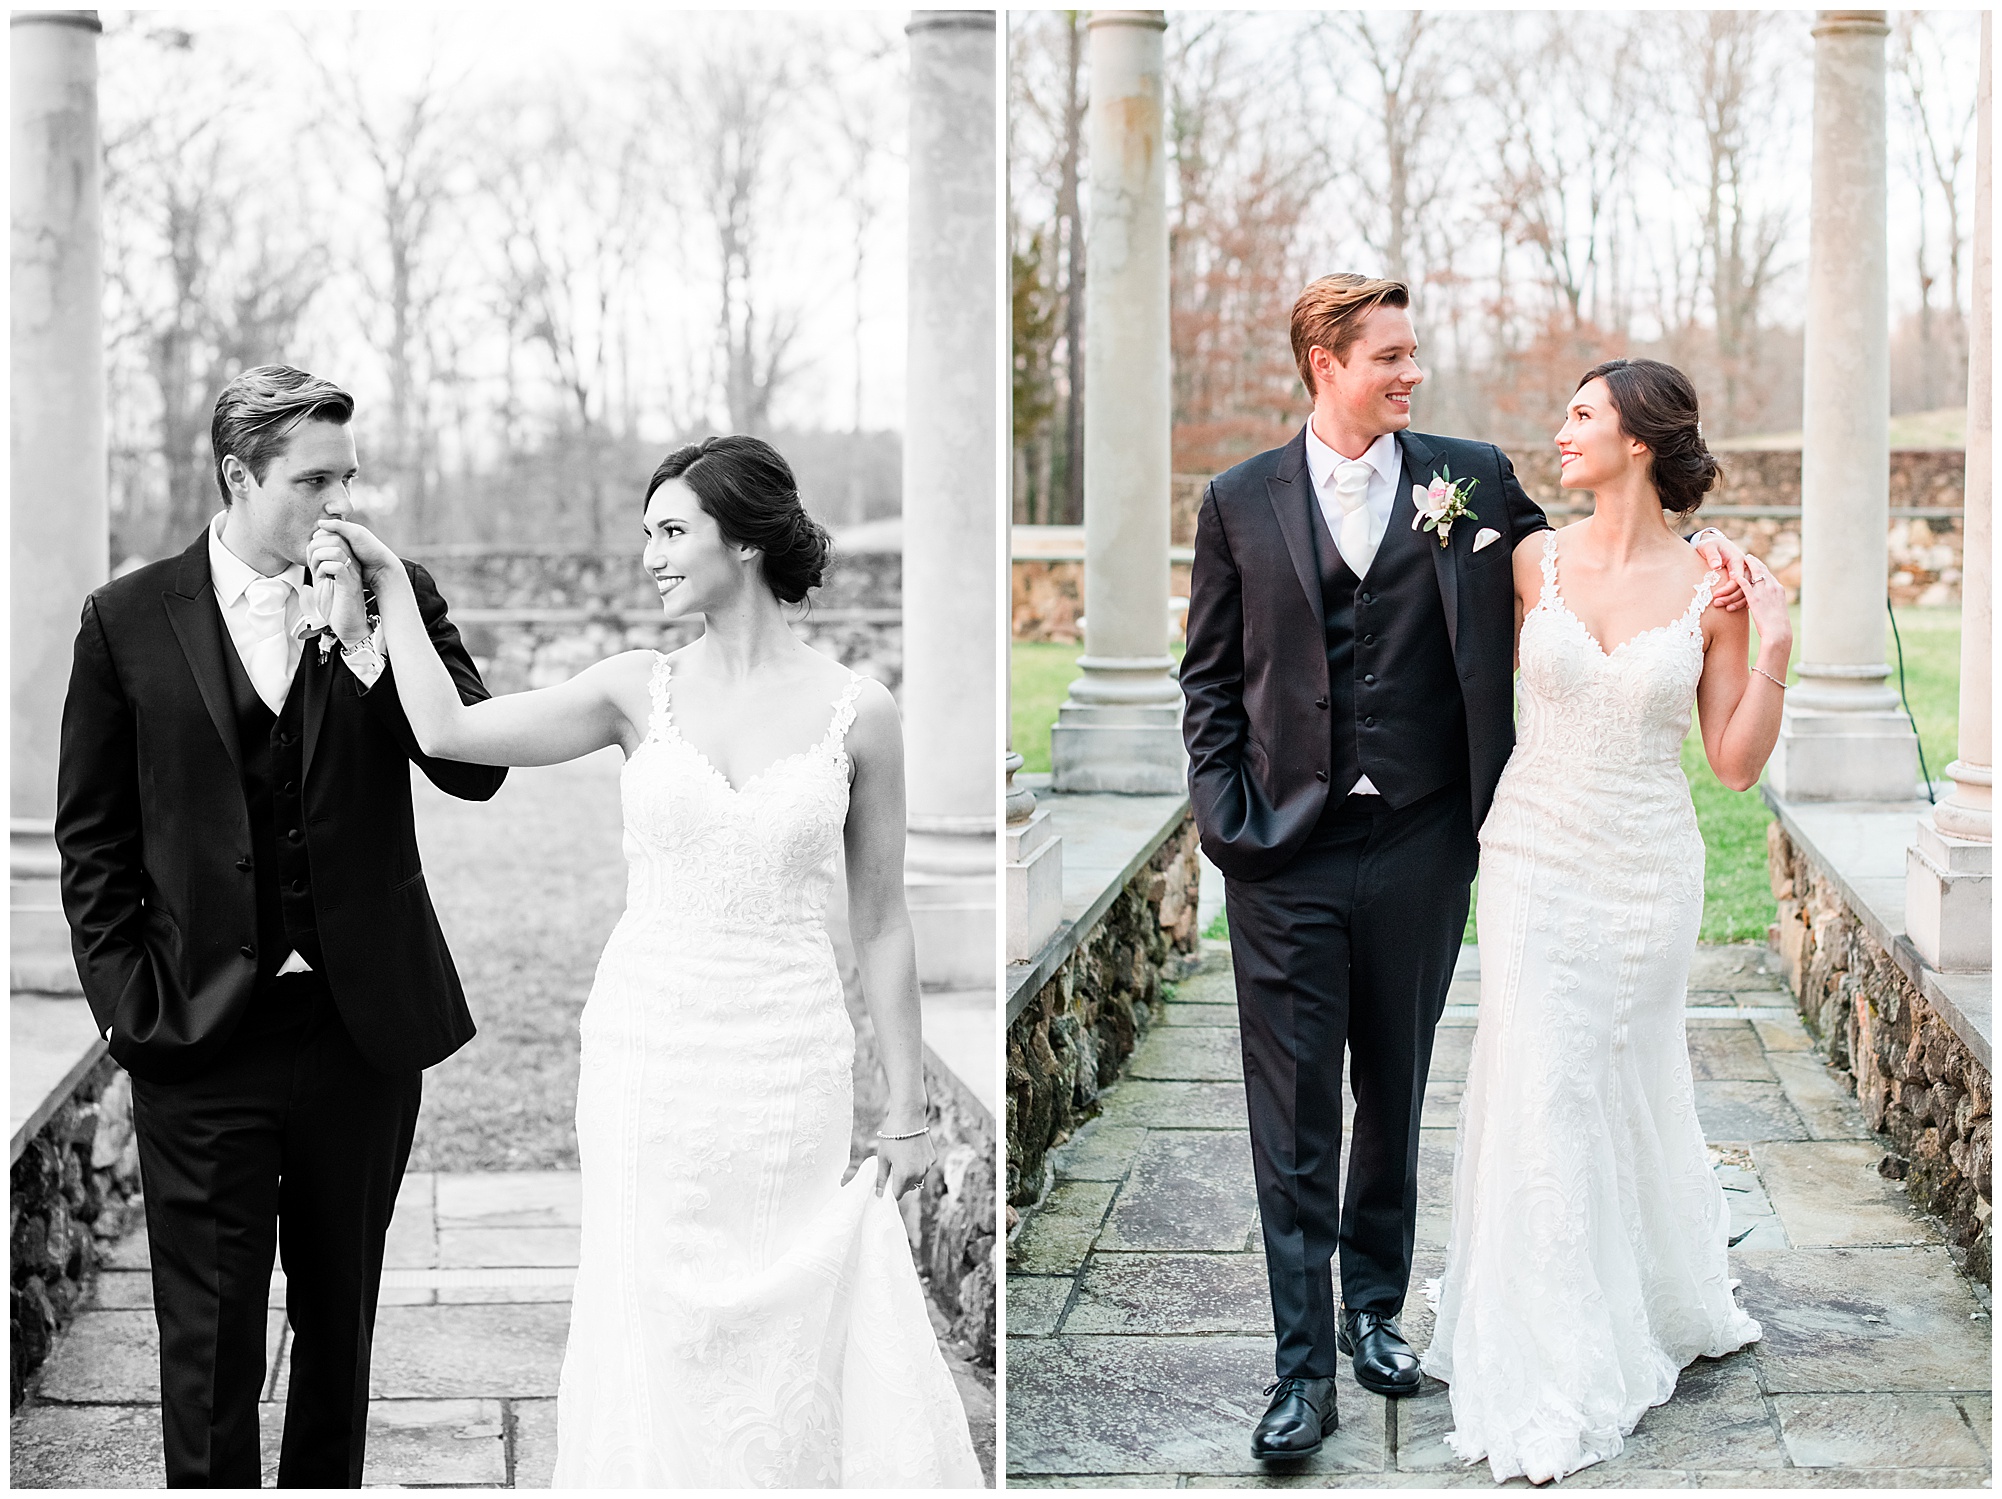 bride and groom formal portraits at dover hall estate. by sarah & dave photographer, richmond rva wedding photographer.